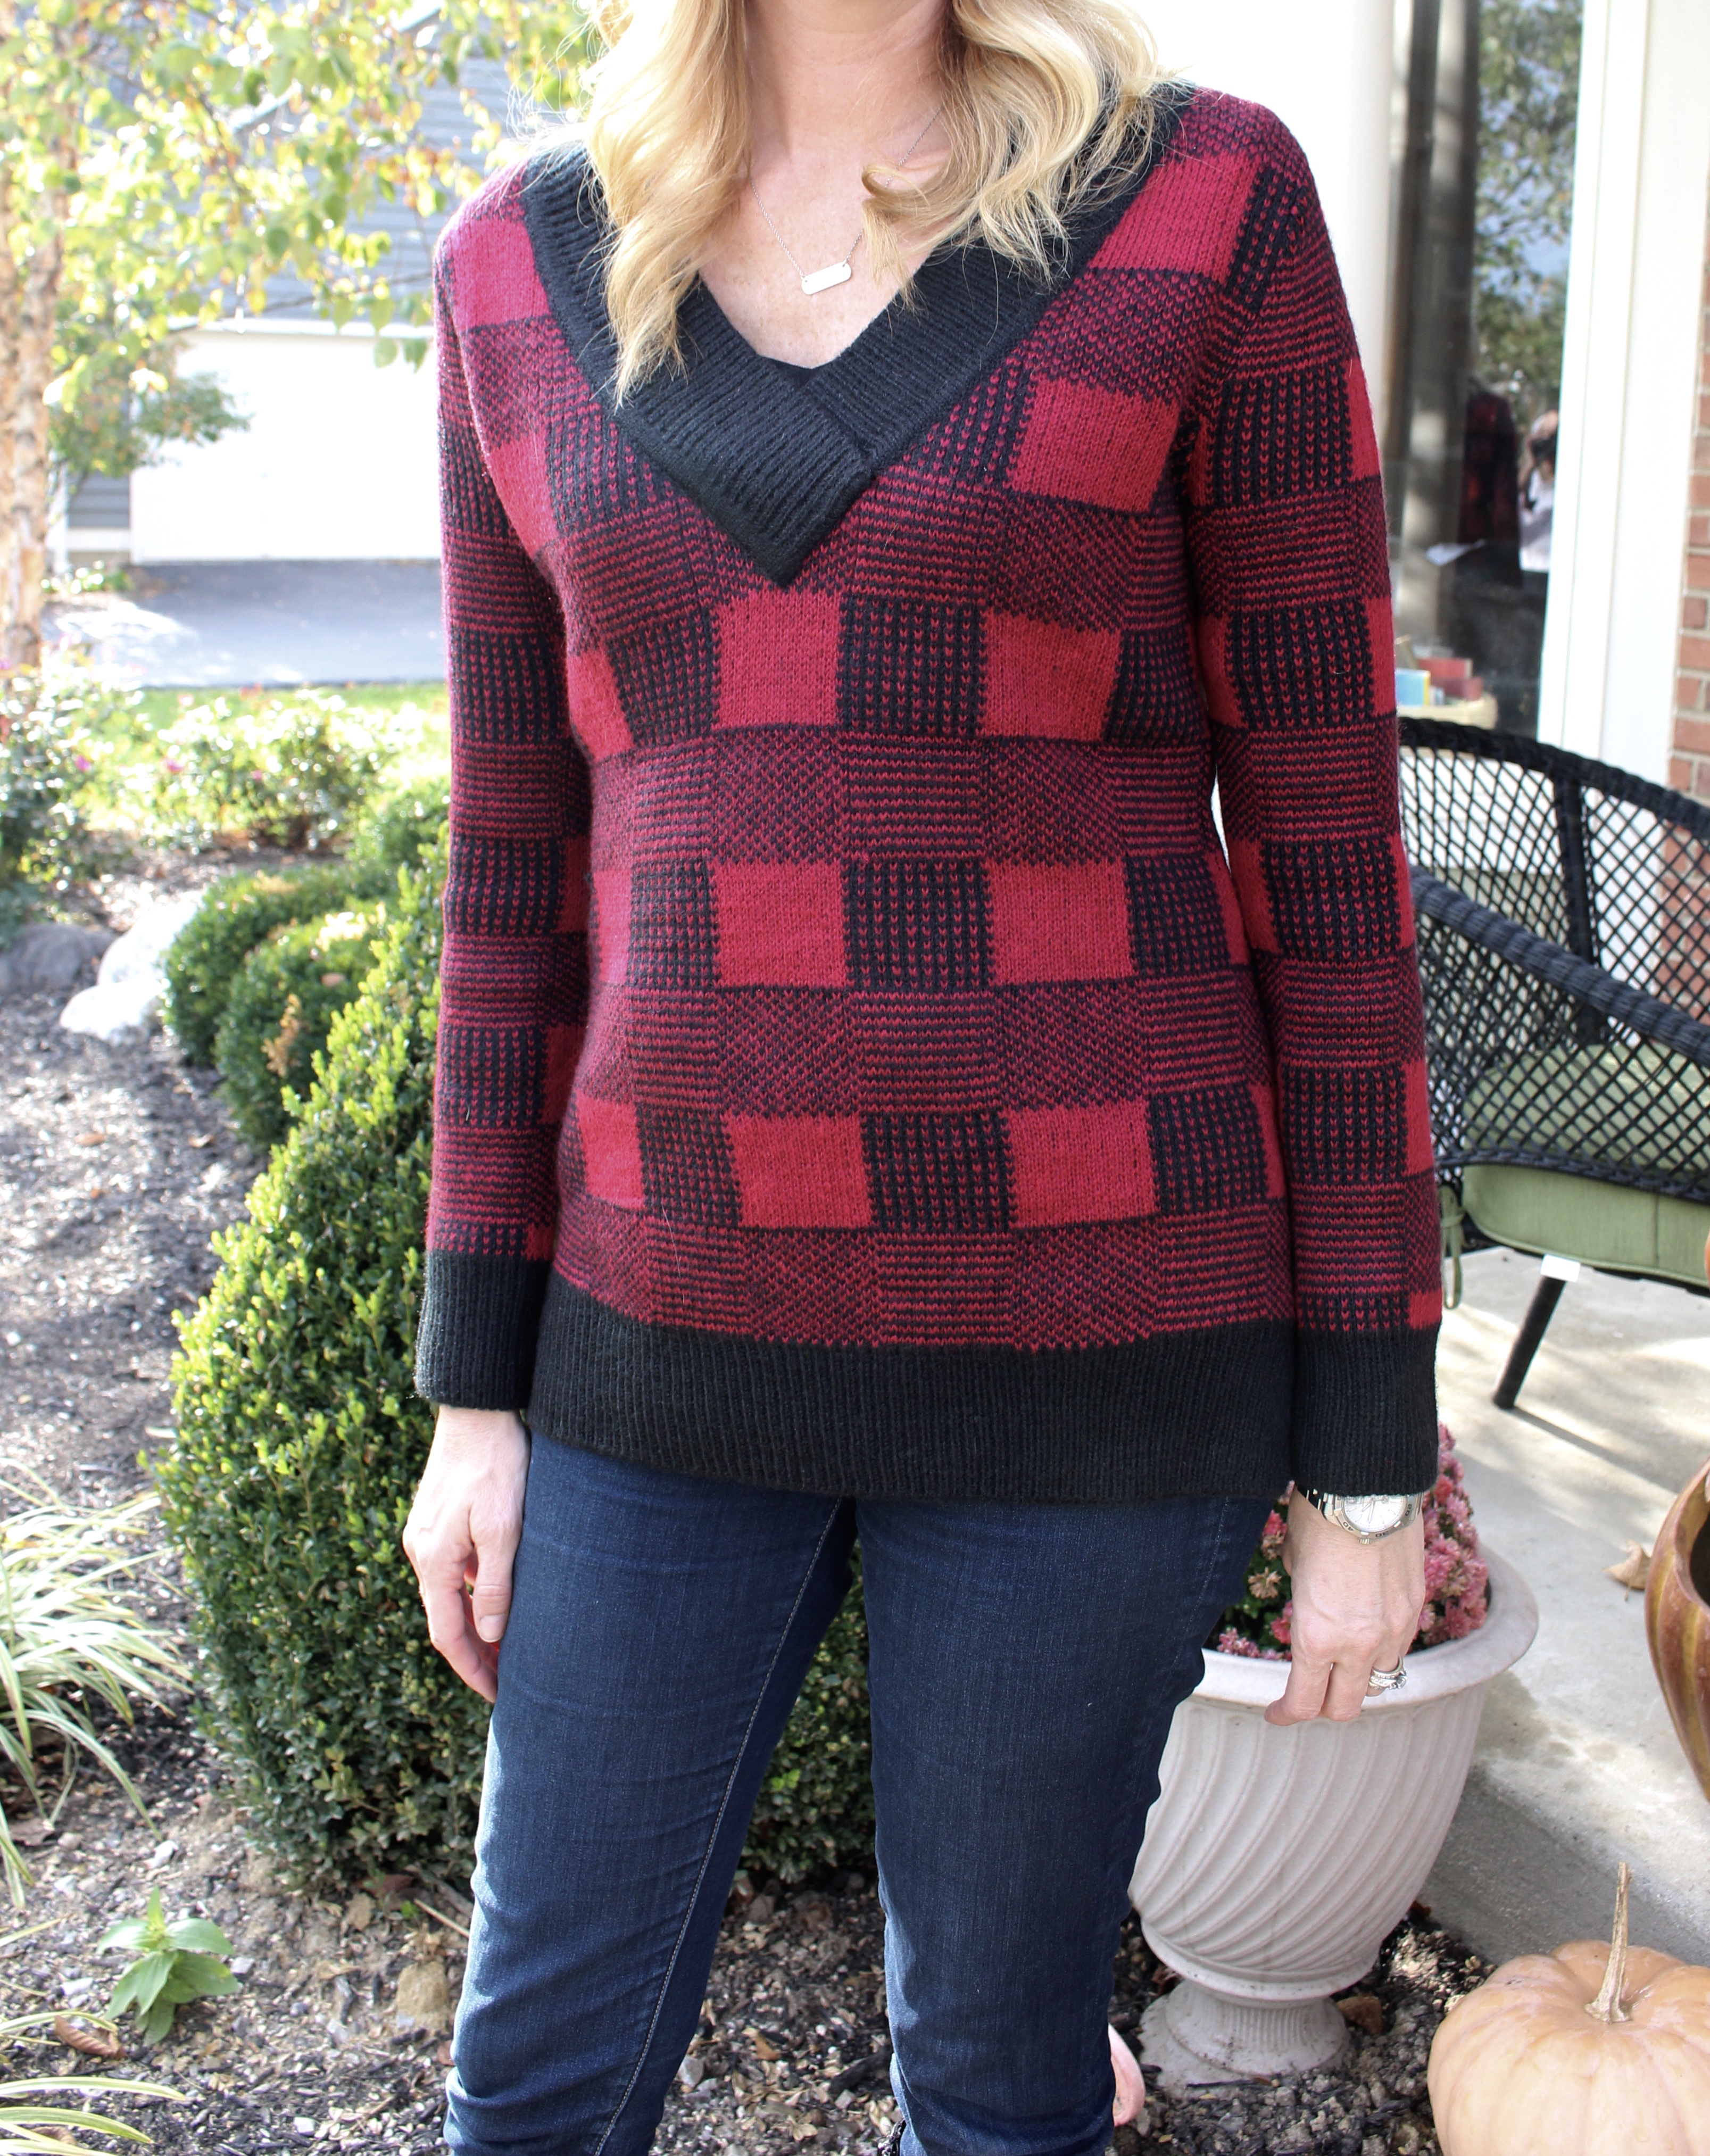 Stitch Fix- plaid sweater- fall and winter fashion- women's fashion- wardrobe- personal styling box- monthly subscription box- casual look- style- outfits